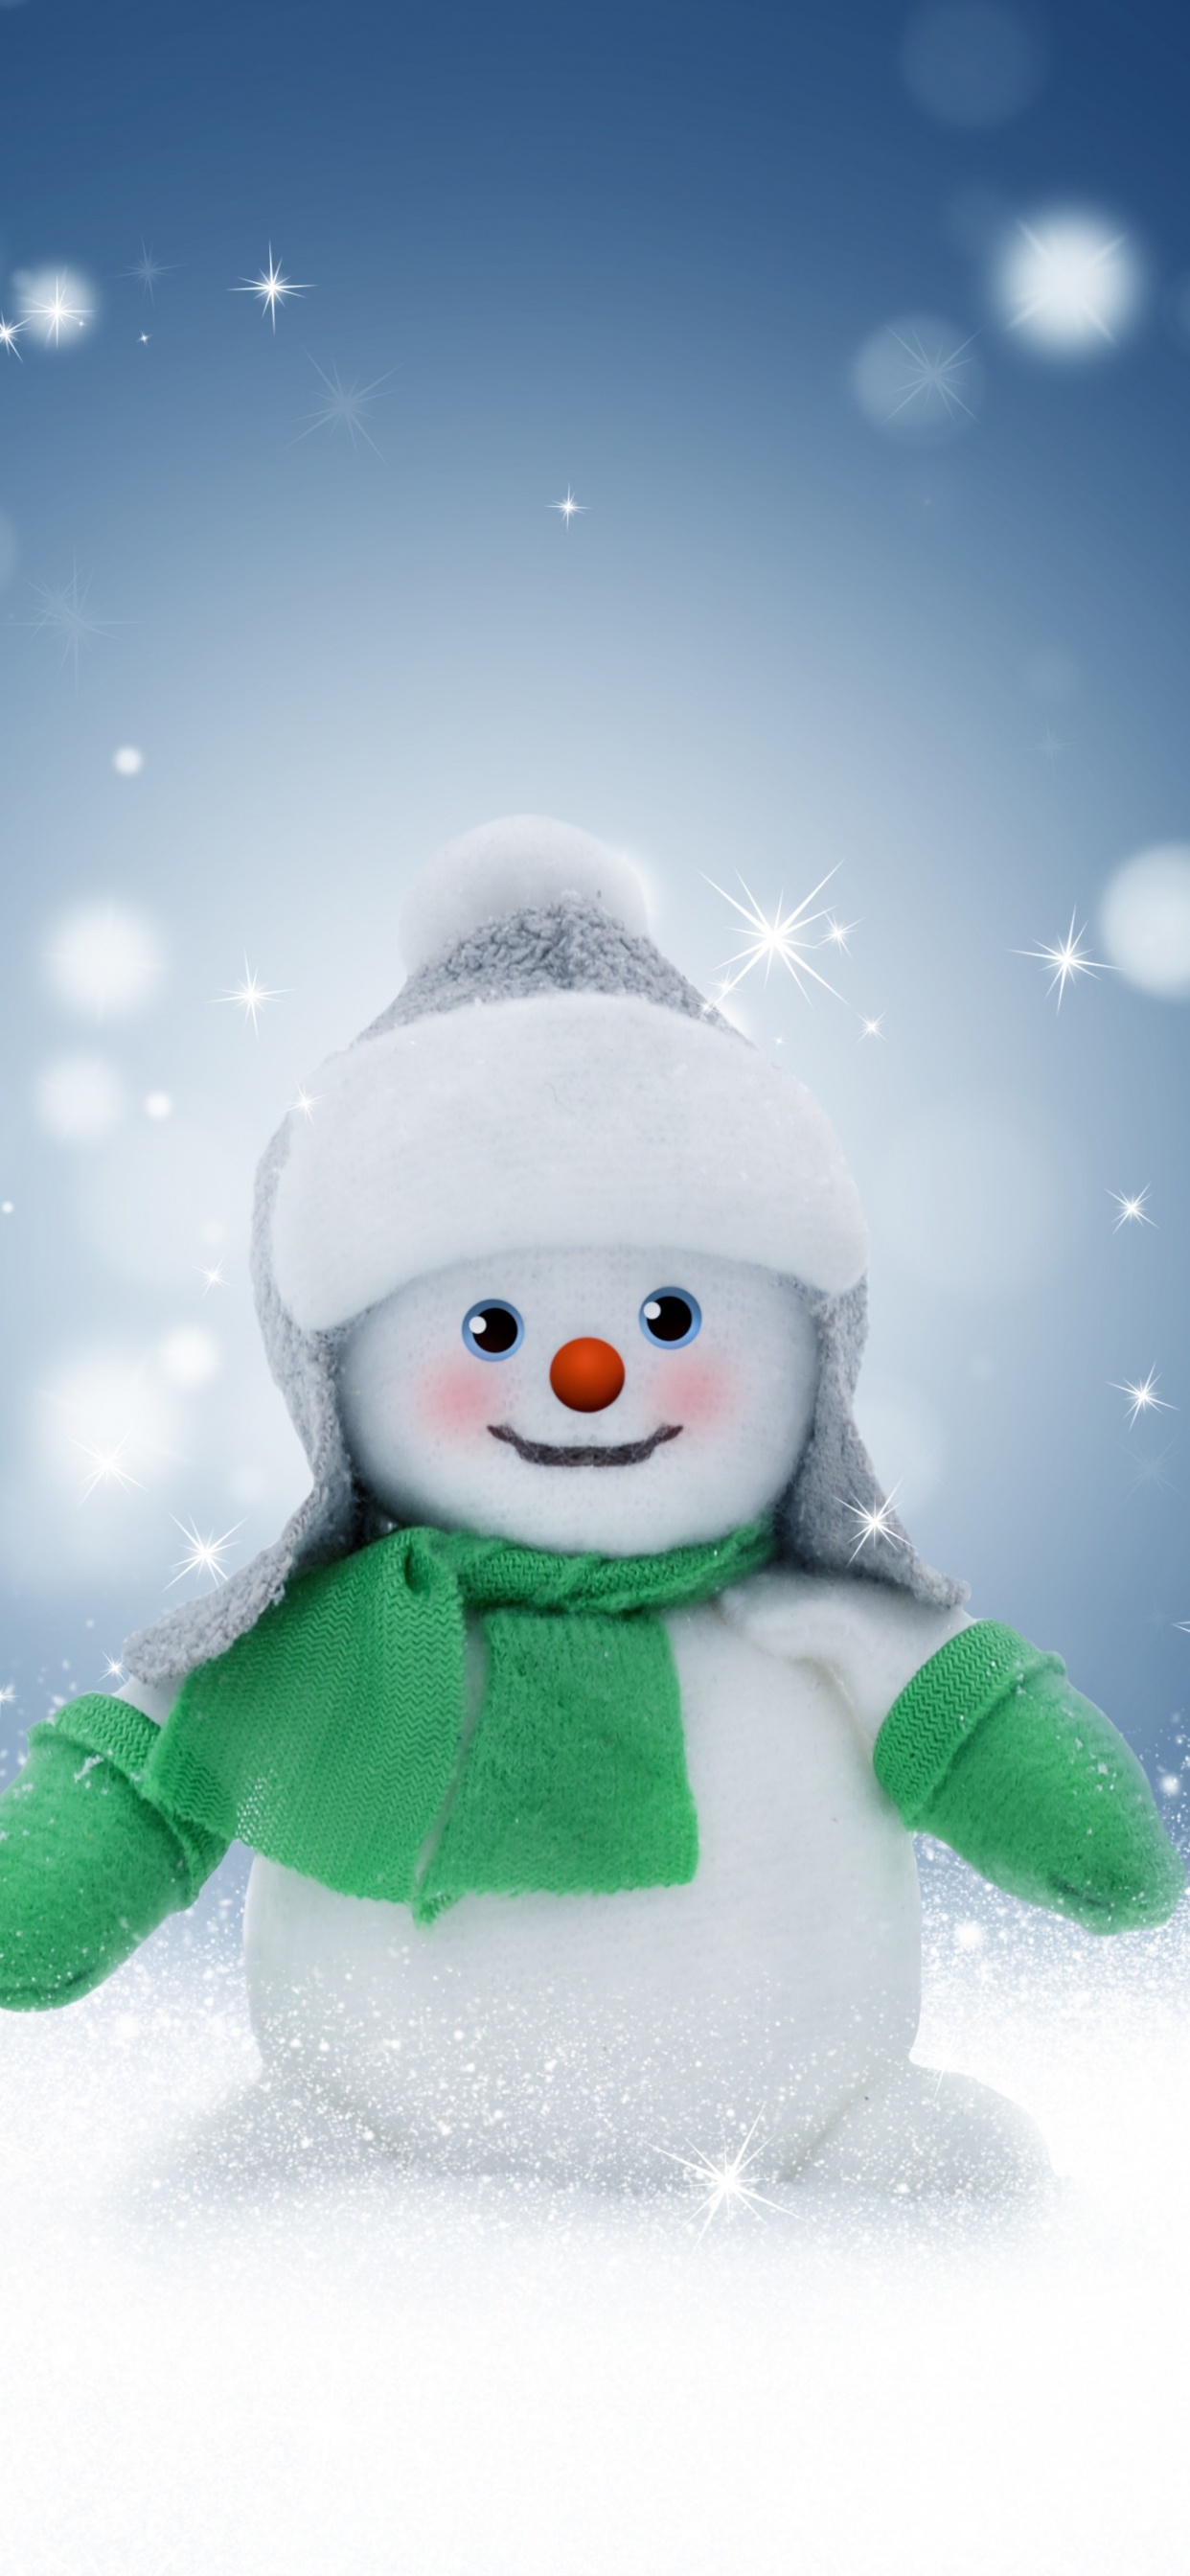 Christmas Day, Snow, Winter, Snowman, Playing in The Snow. Wallpaper in 1242x2688 Resolution